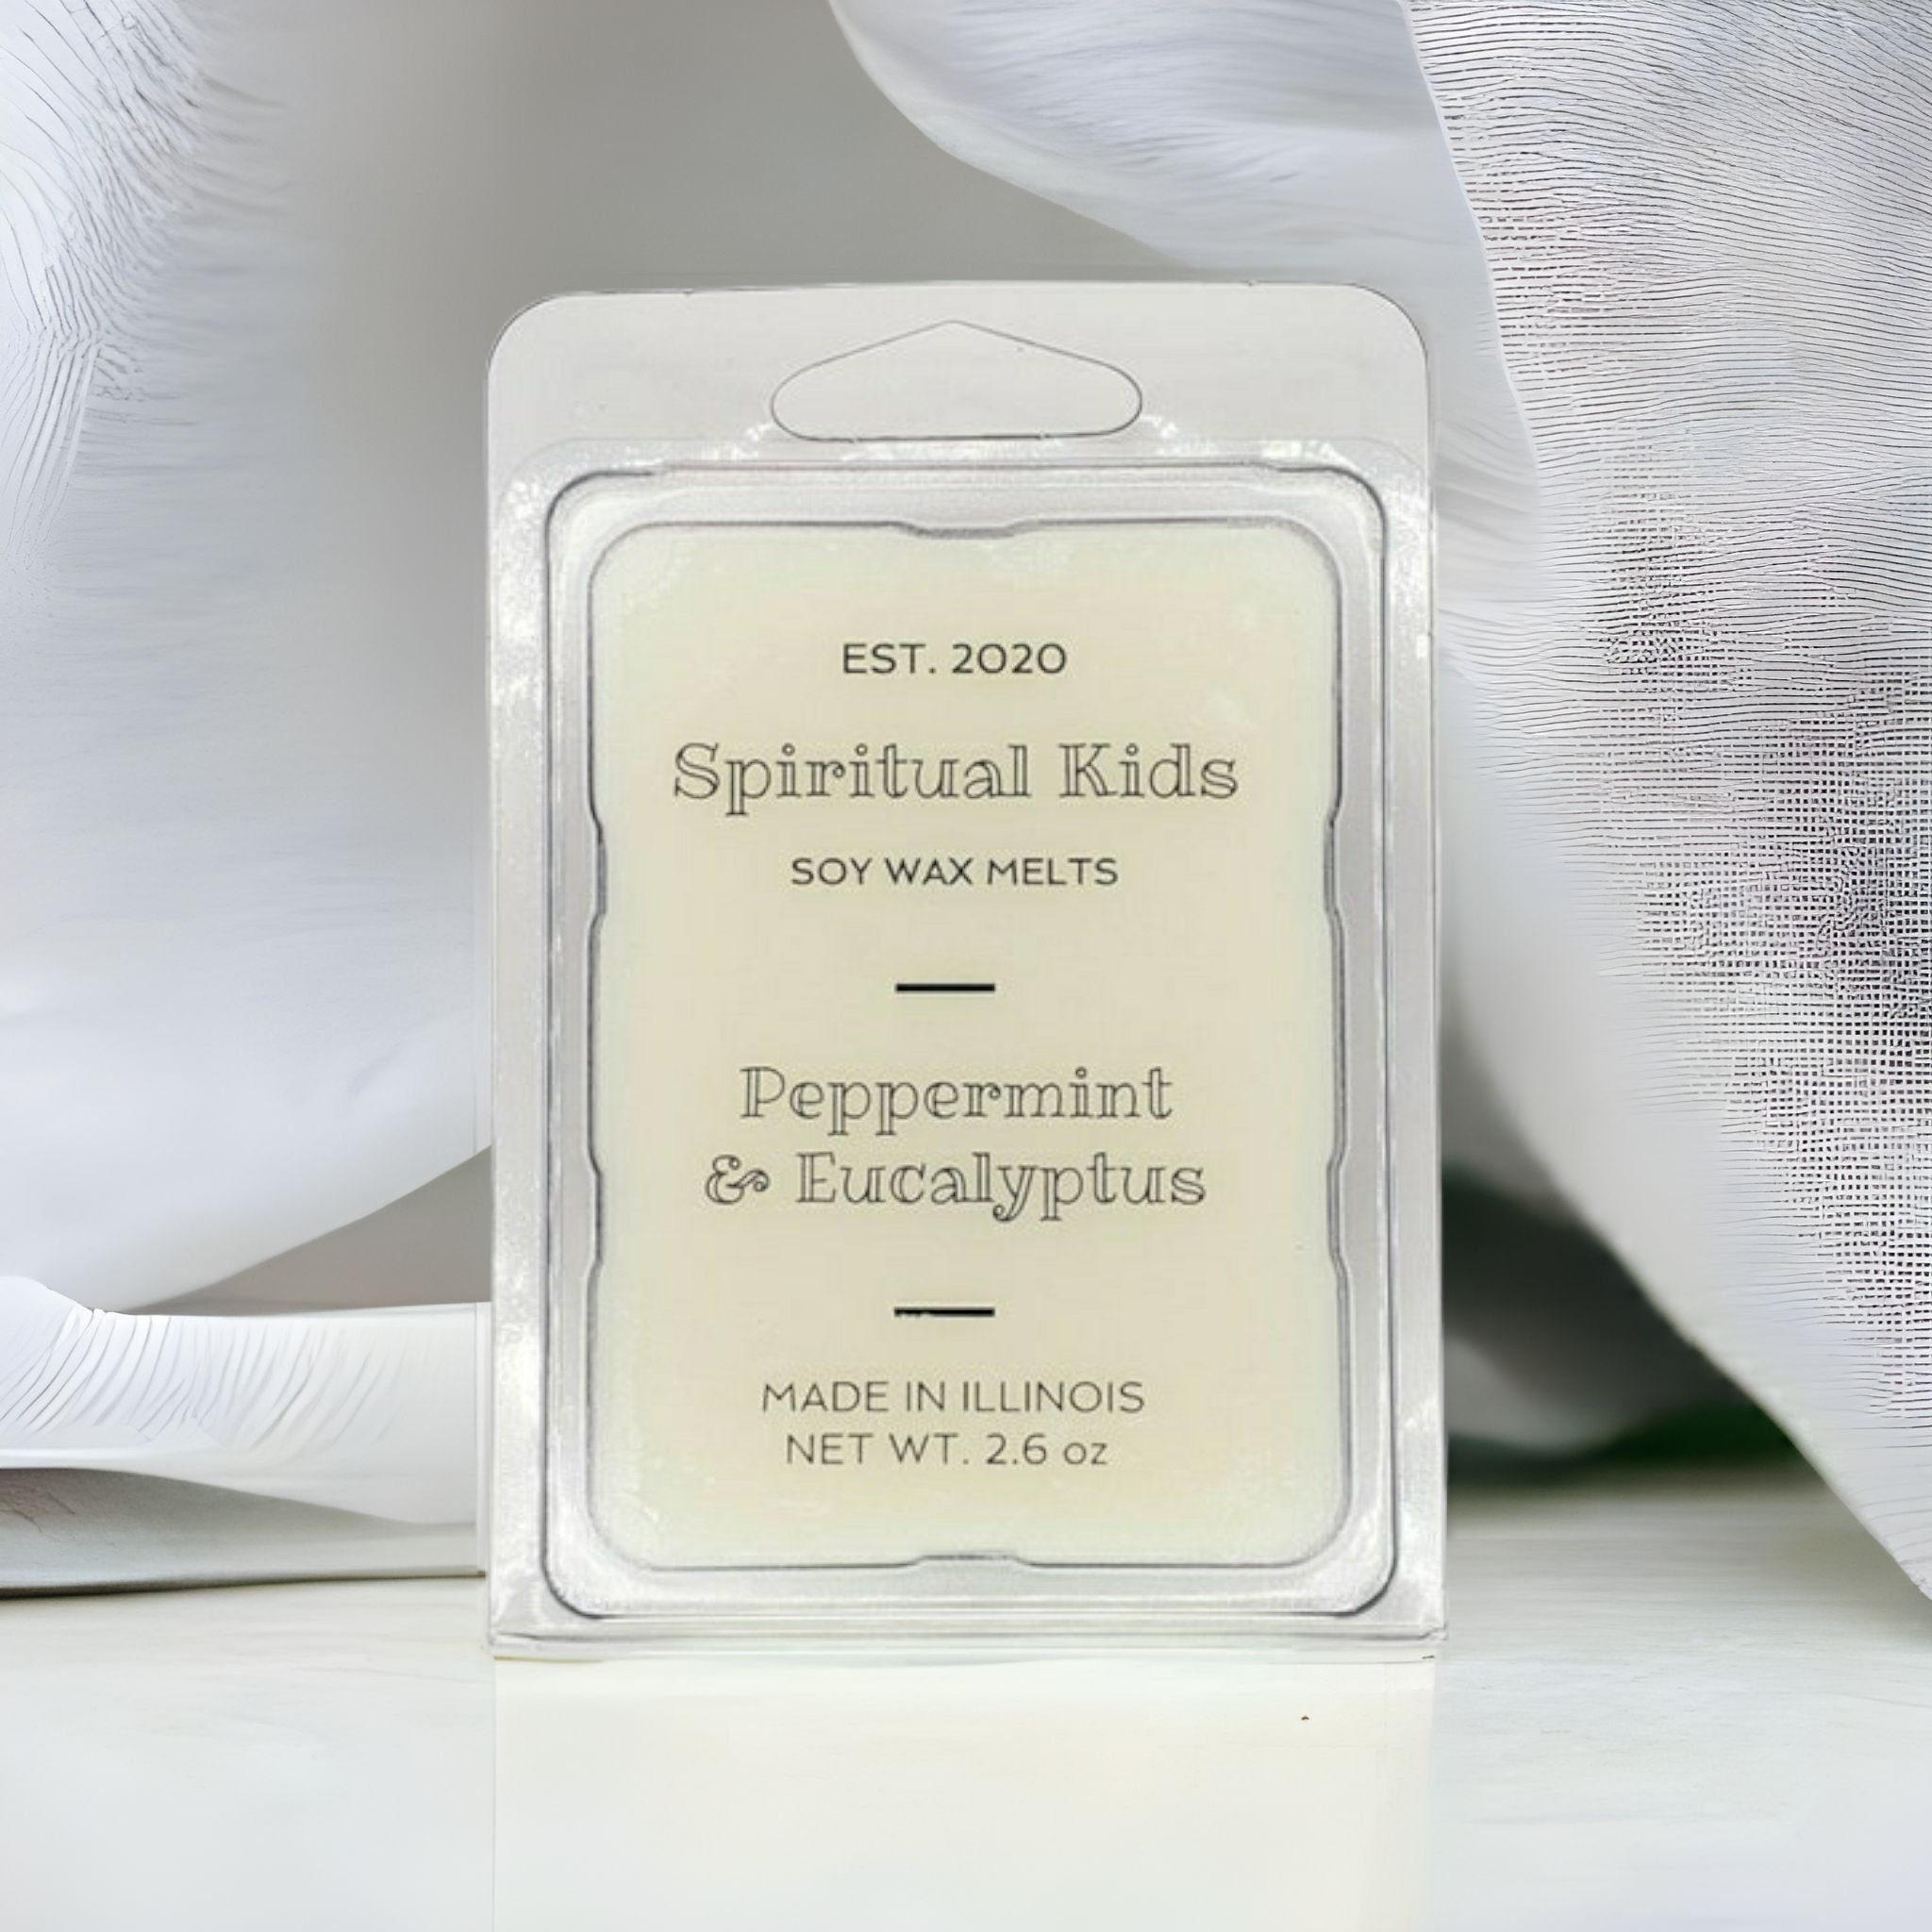 Peppermint & Eucalyptus 2.6oz All Natural Soy Wax Melts 6ct Hand